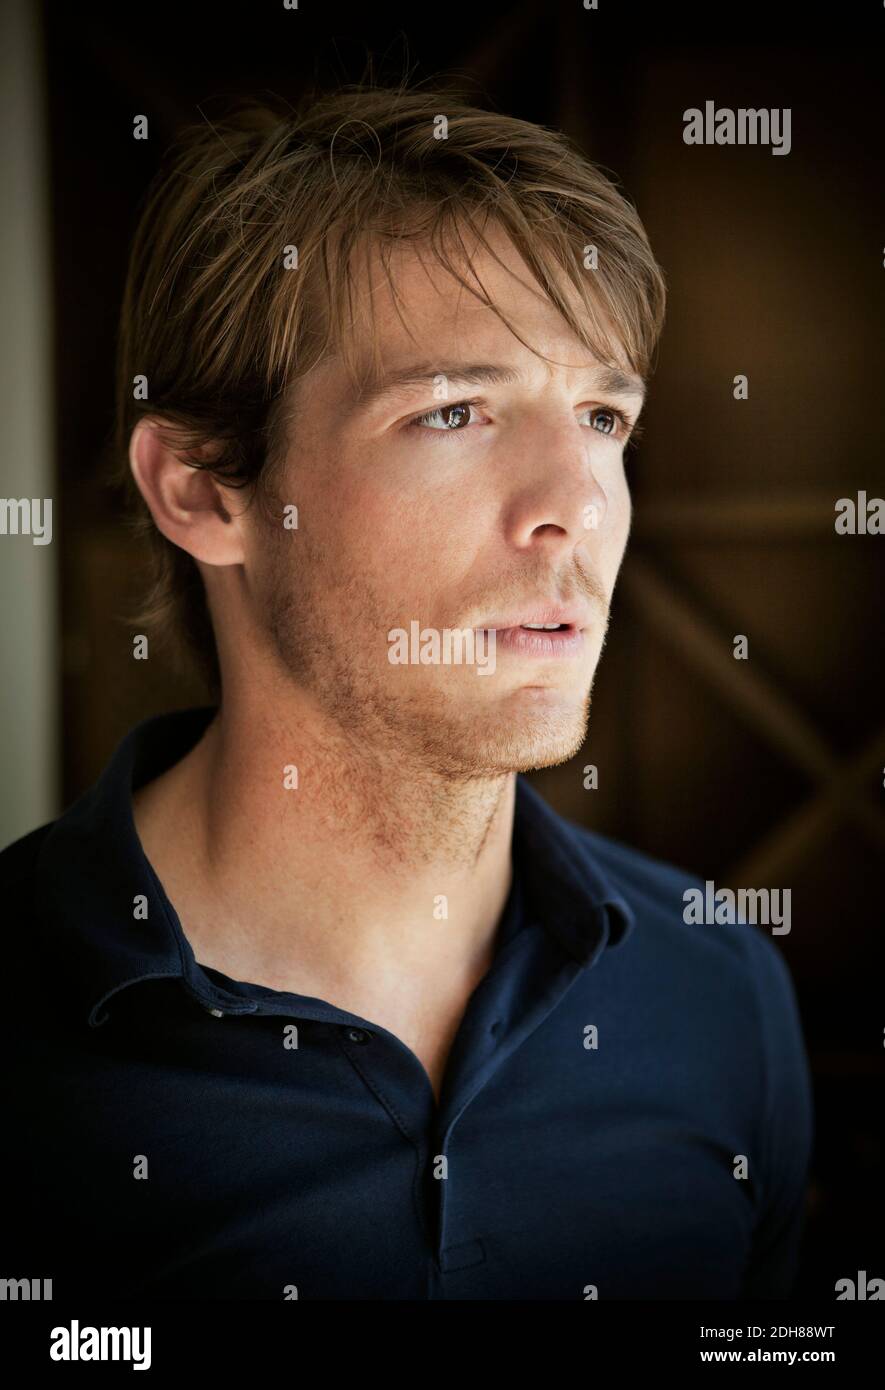 Close up of serious mid adult man looking away Stock Photo